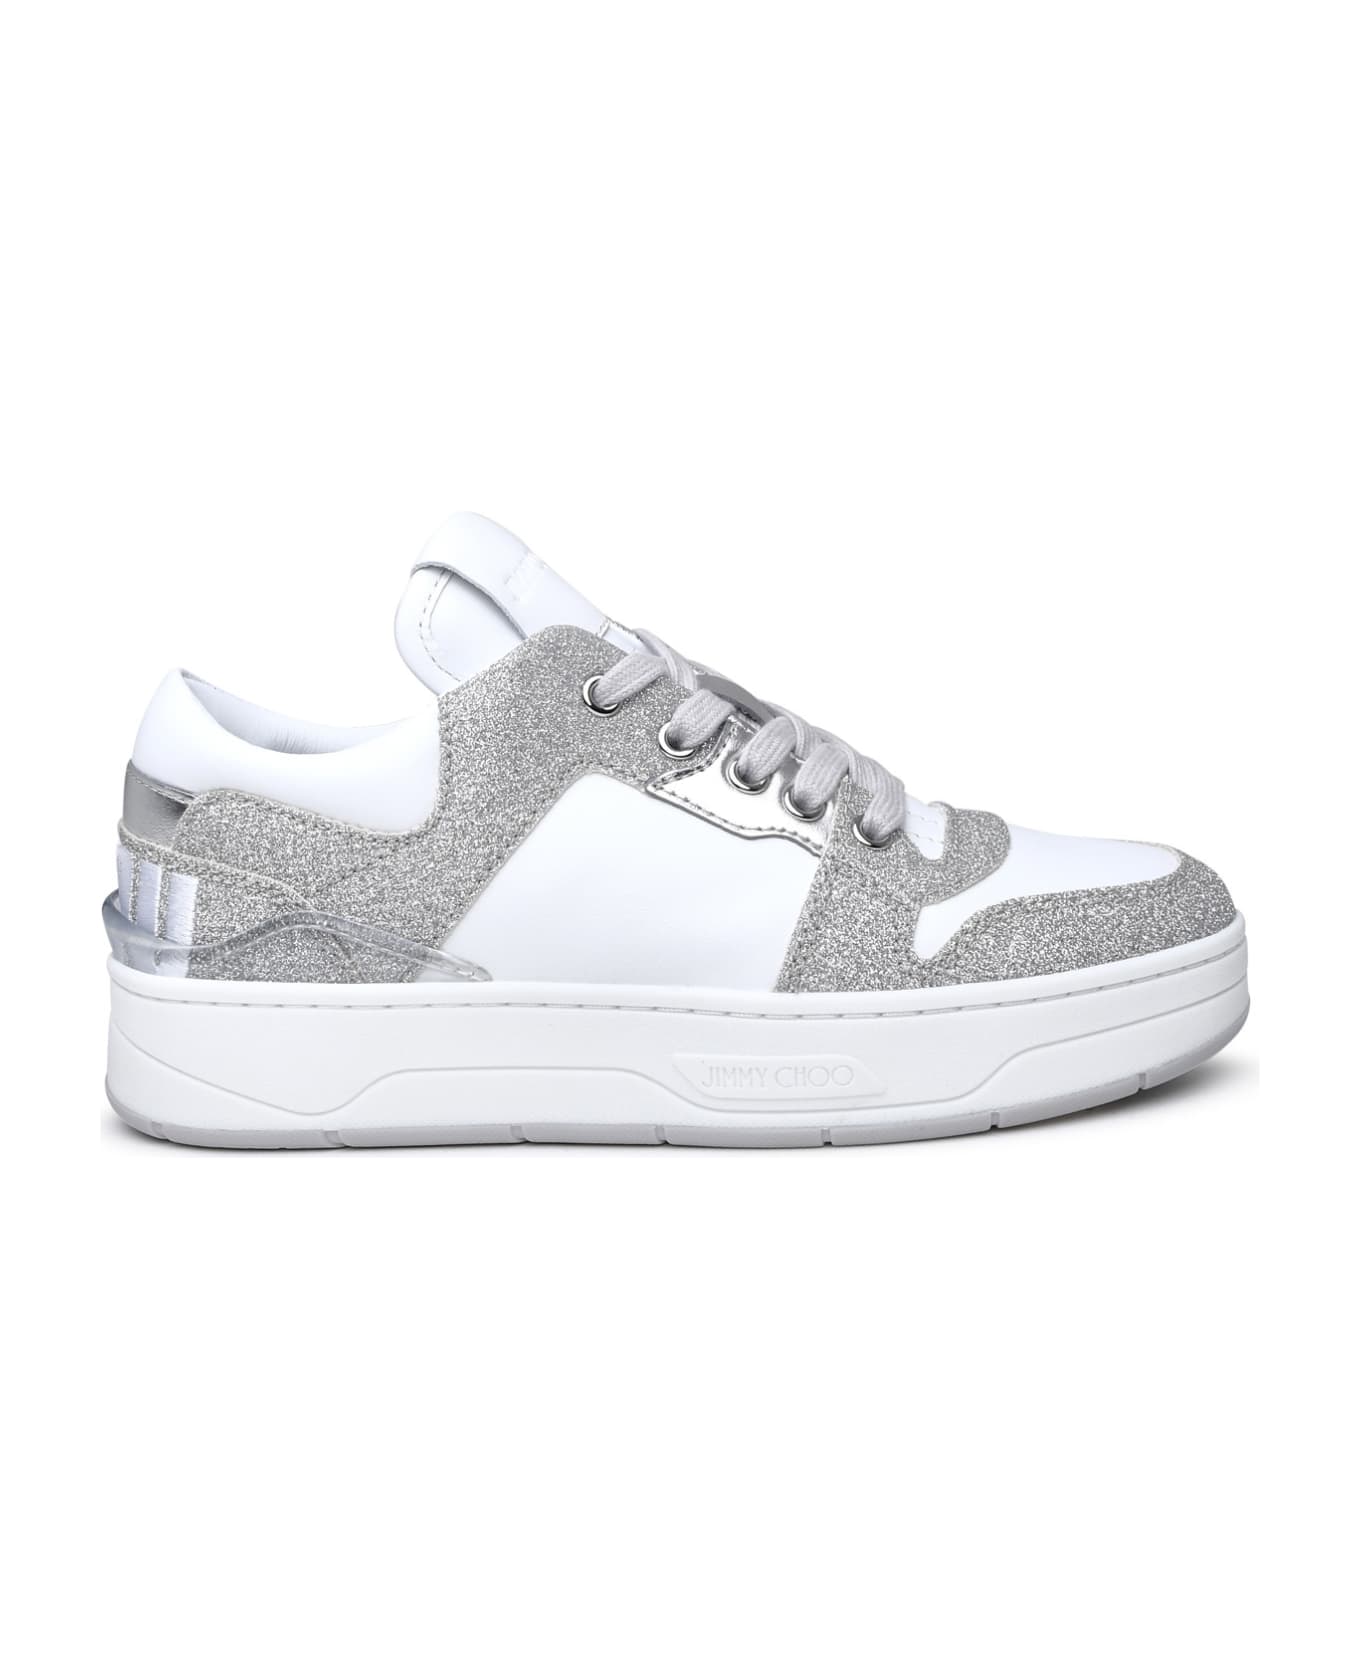 Jimmy Choo Cashmere White Leather Sneakers - White